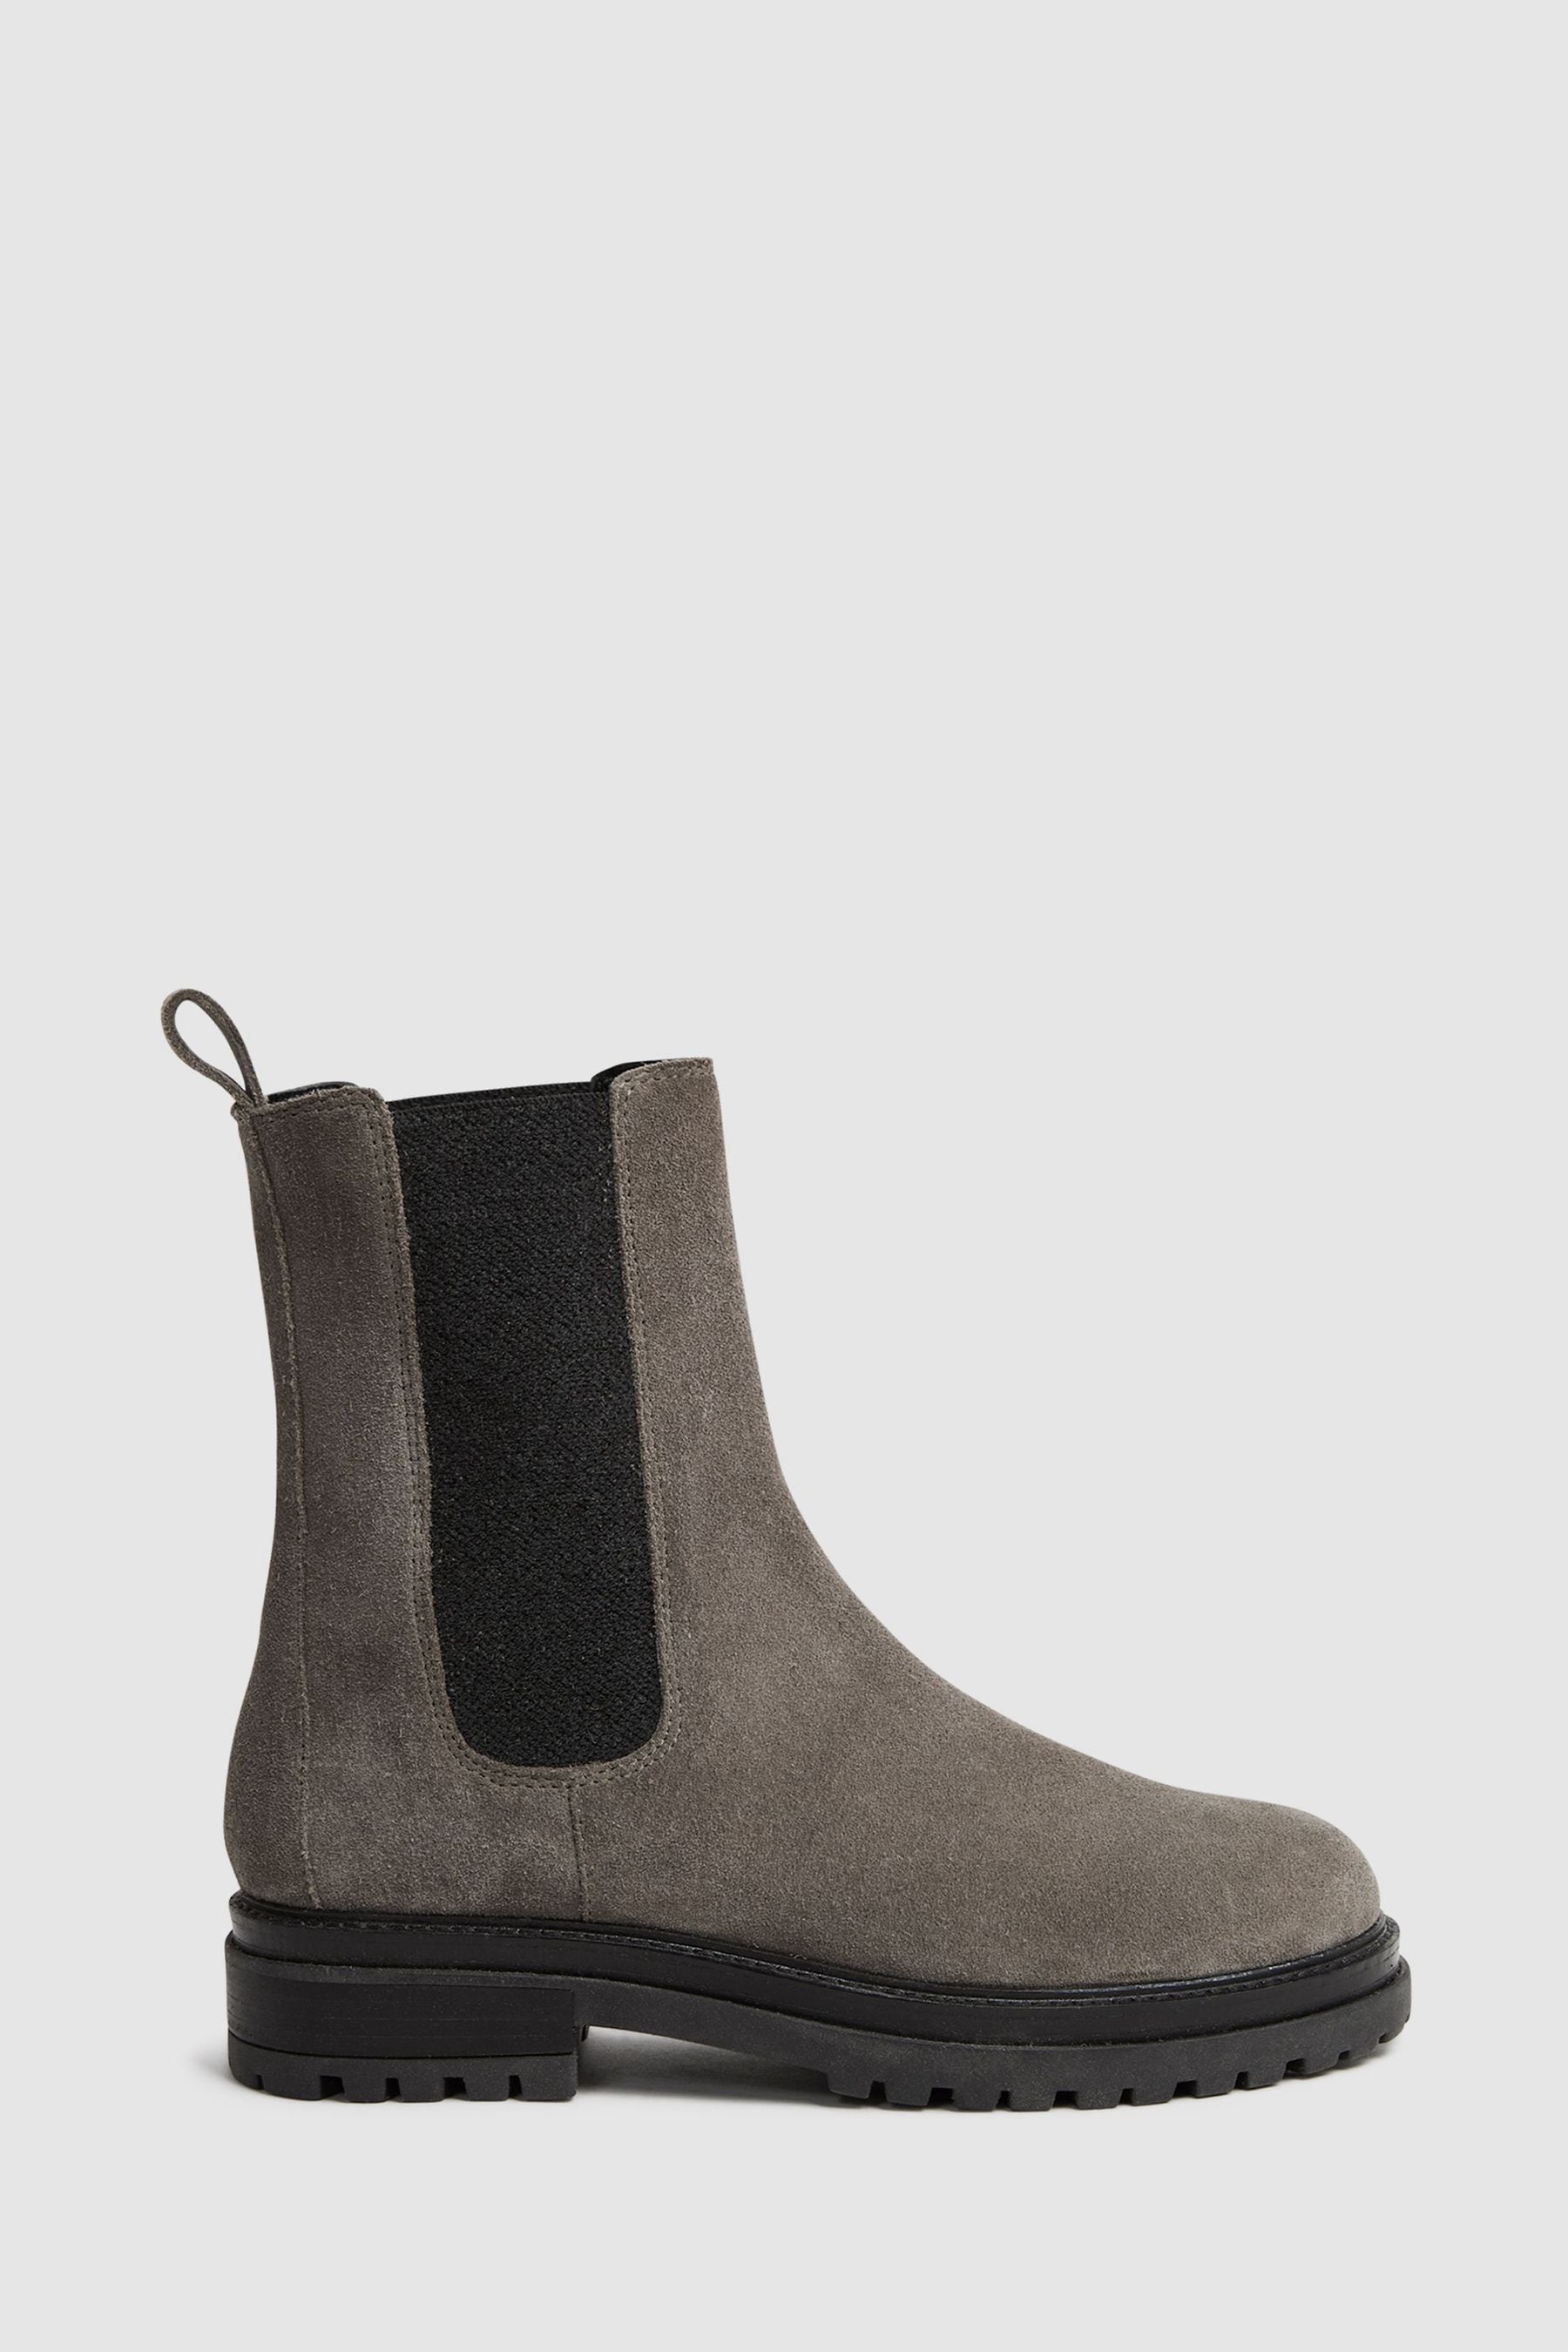 Thea Suede Chelsea Boots - Grey Leather Plain